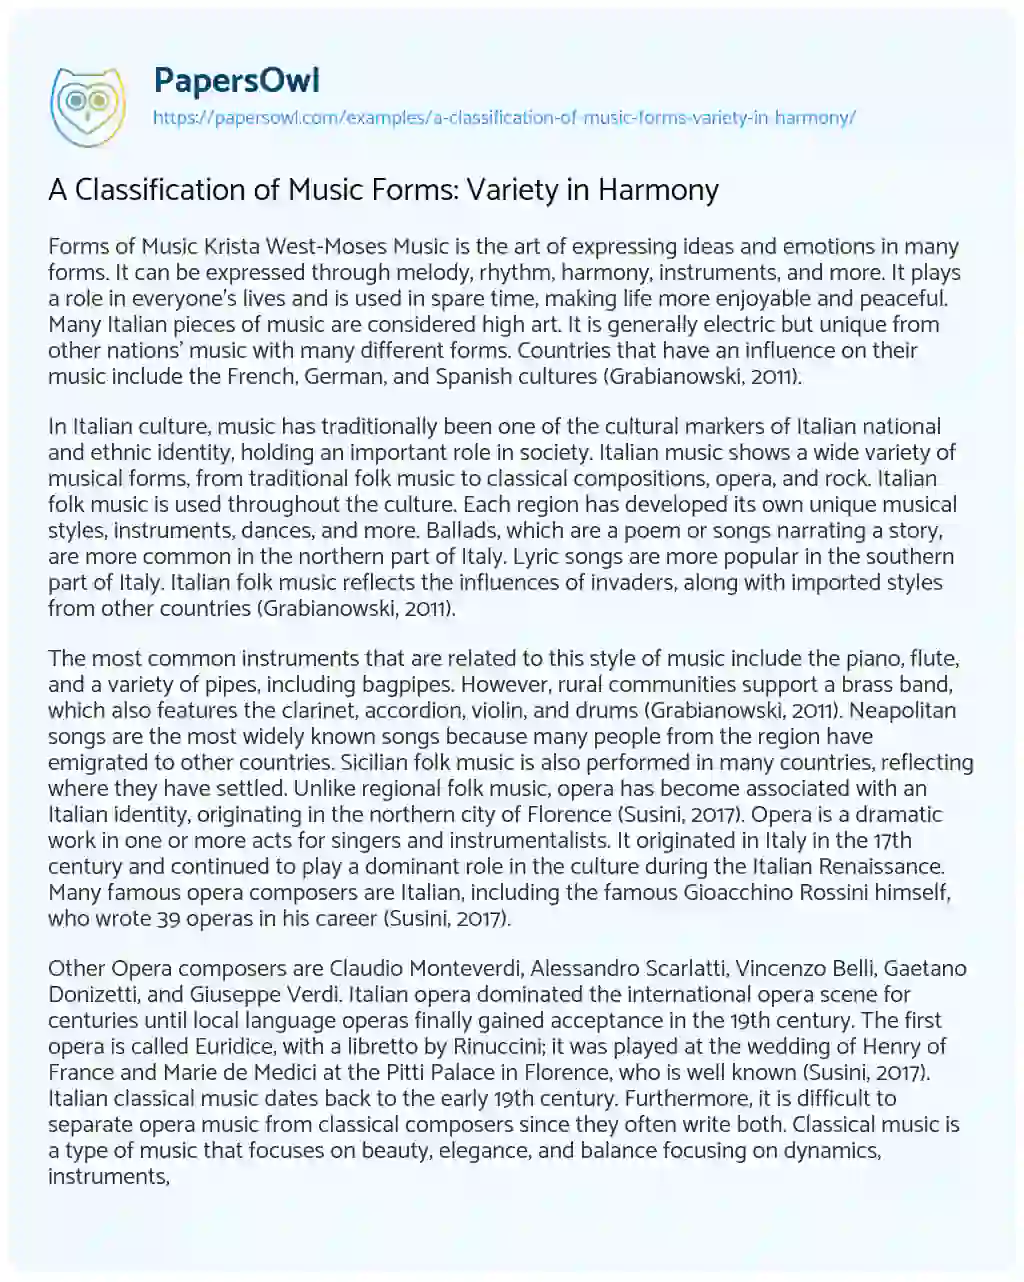 Essay on A Classification of Music Forms: Variety in Harmony